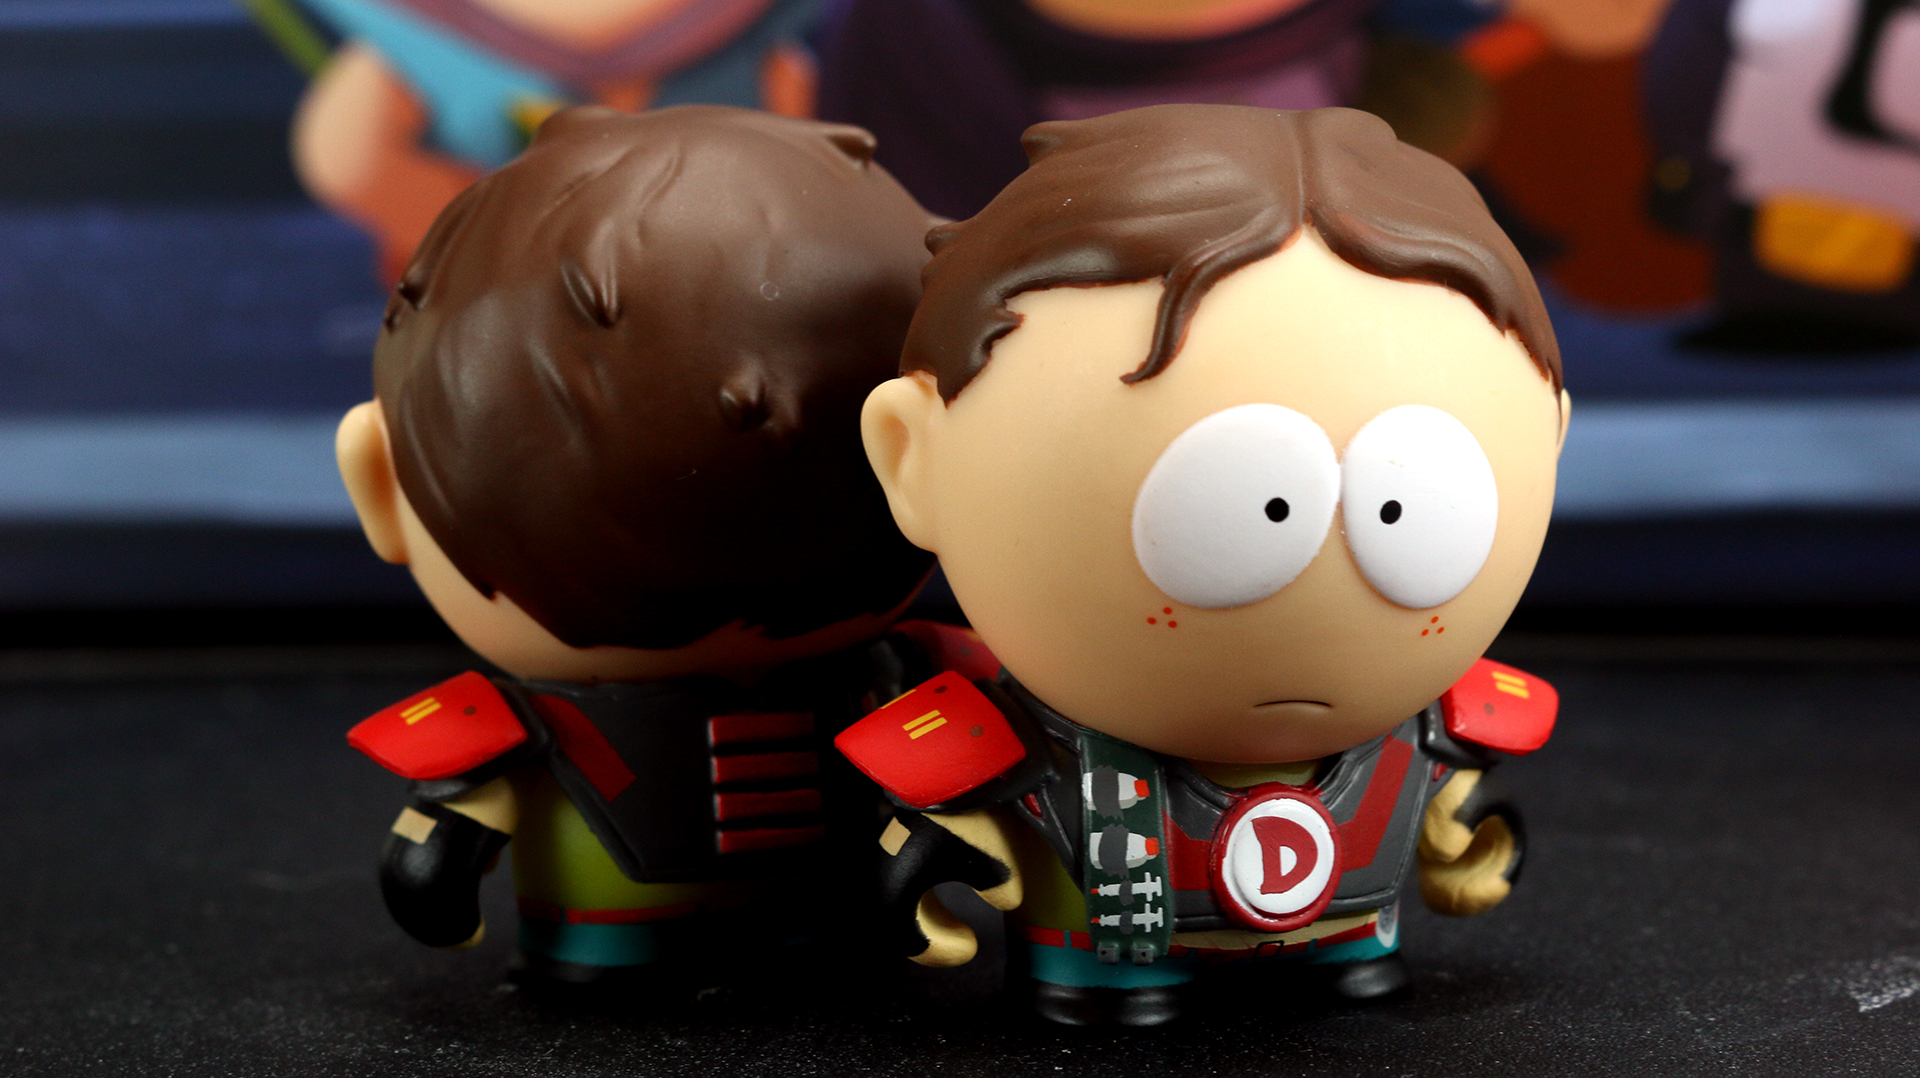 Toy Time Cracks Open A Case Of South Park: The Fractured But Whole Figures